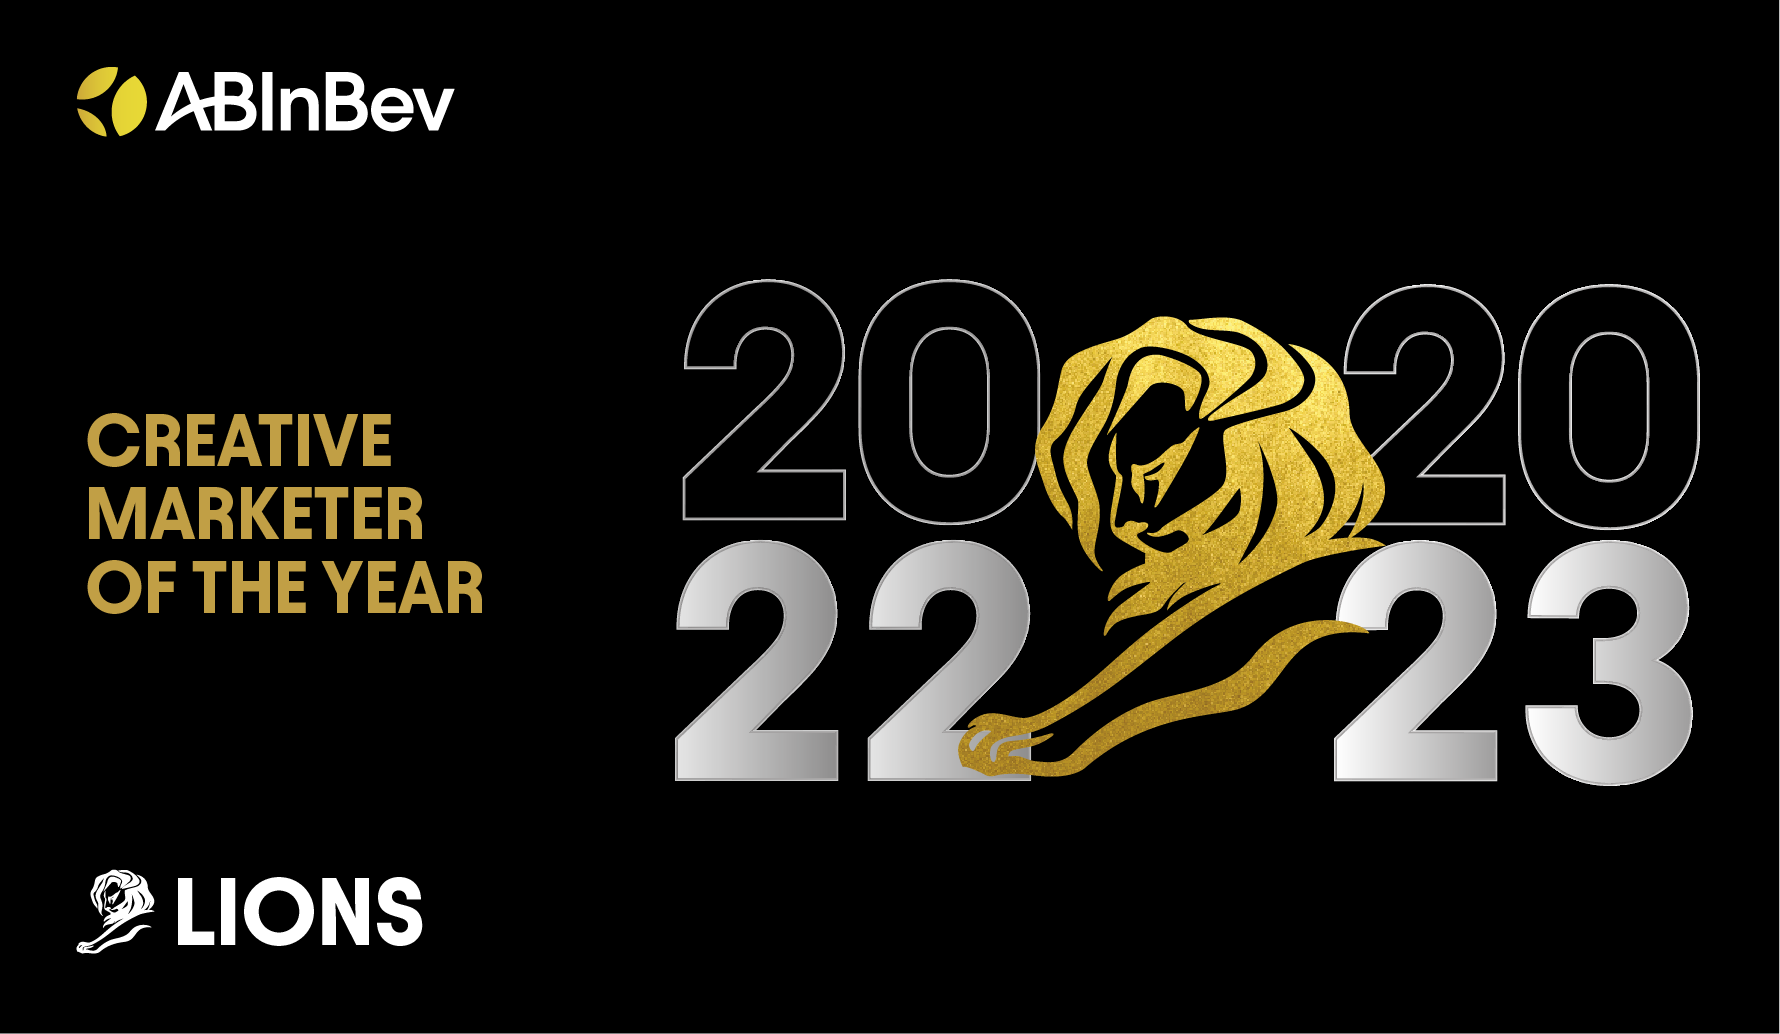 AB InBev is the first-ever, back-to-back Cannes Lions Creative Marketer of the Year